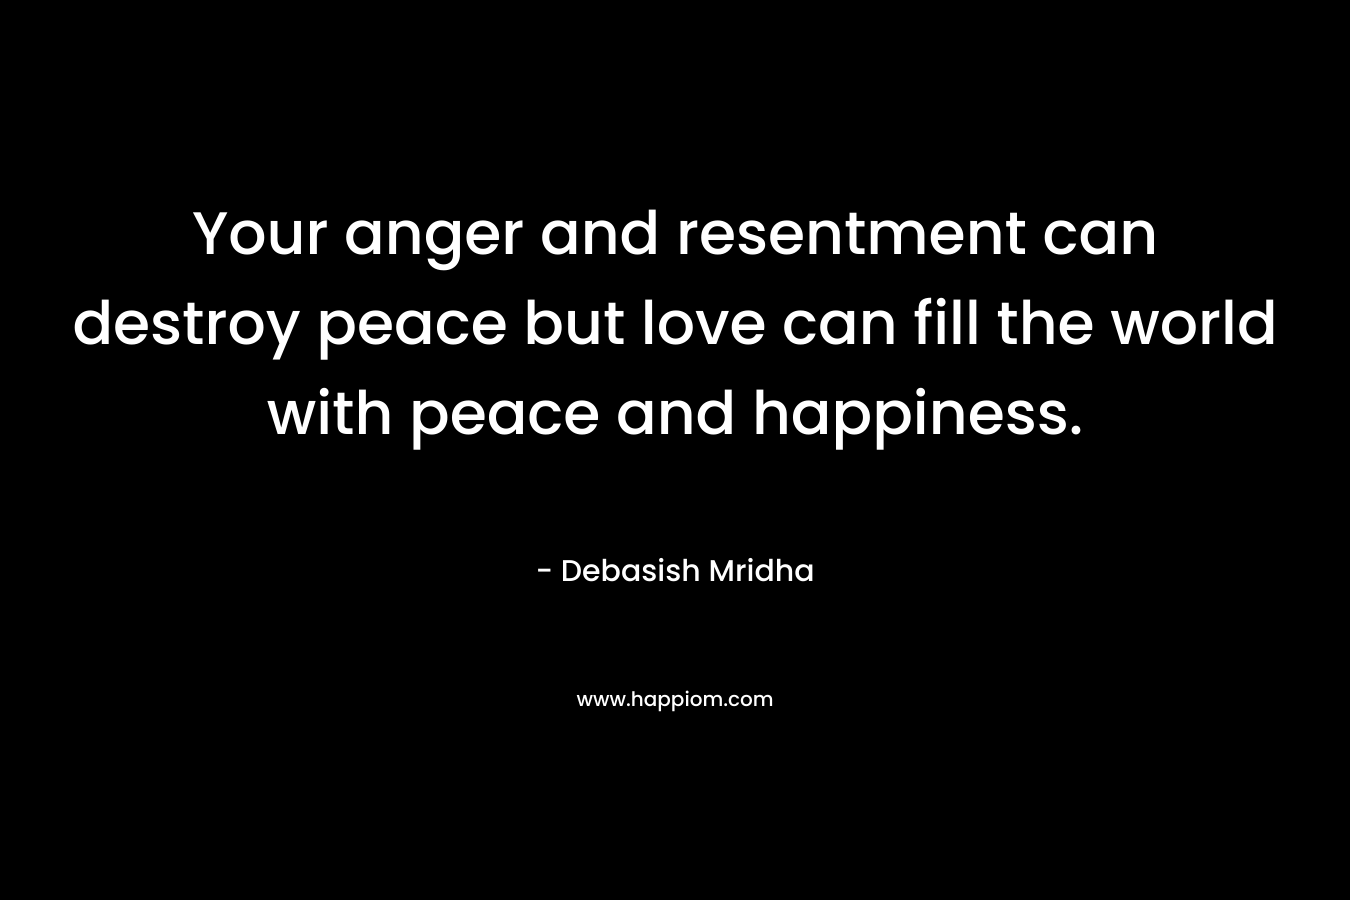 Your anger and resentment can destroy peace but love can fill the world with peace and happiness.